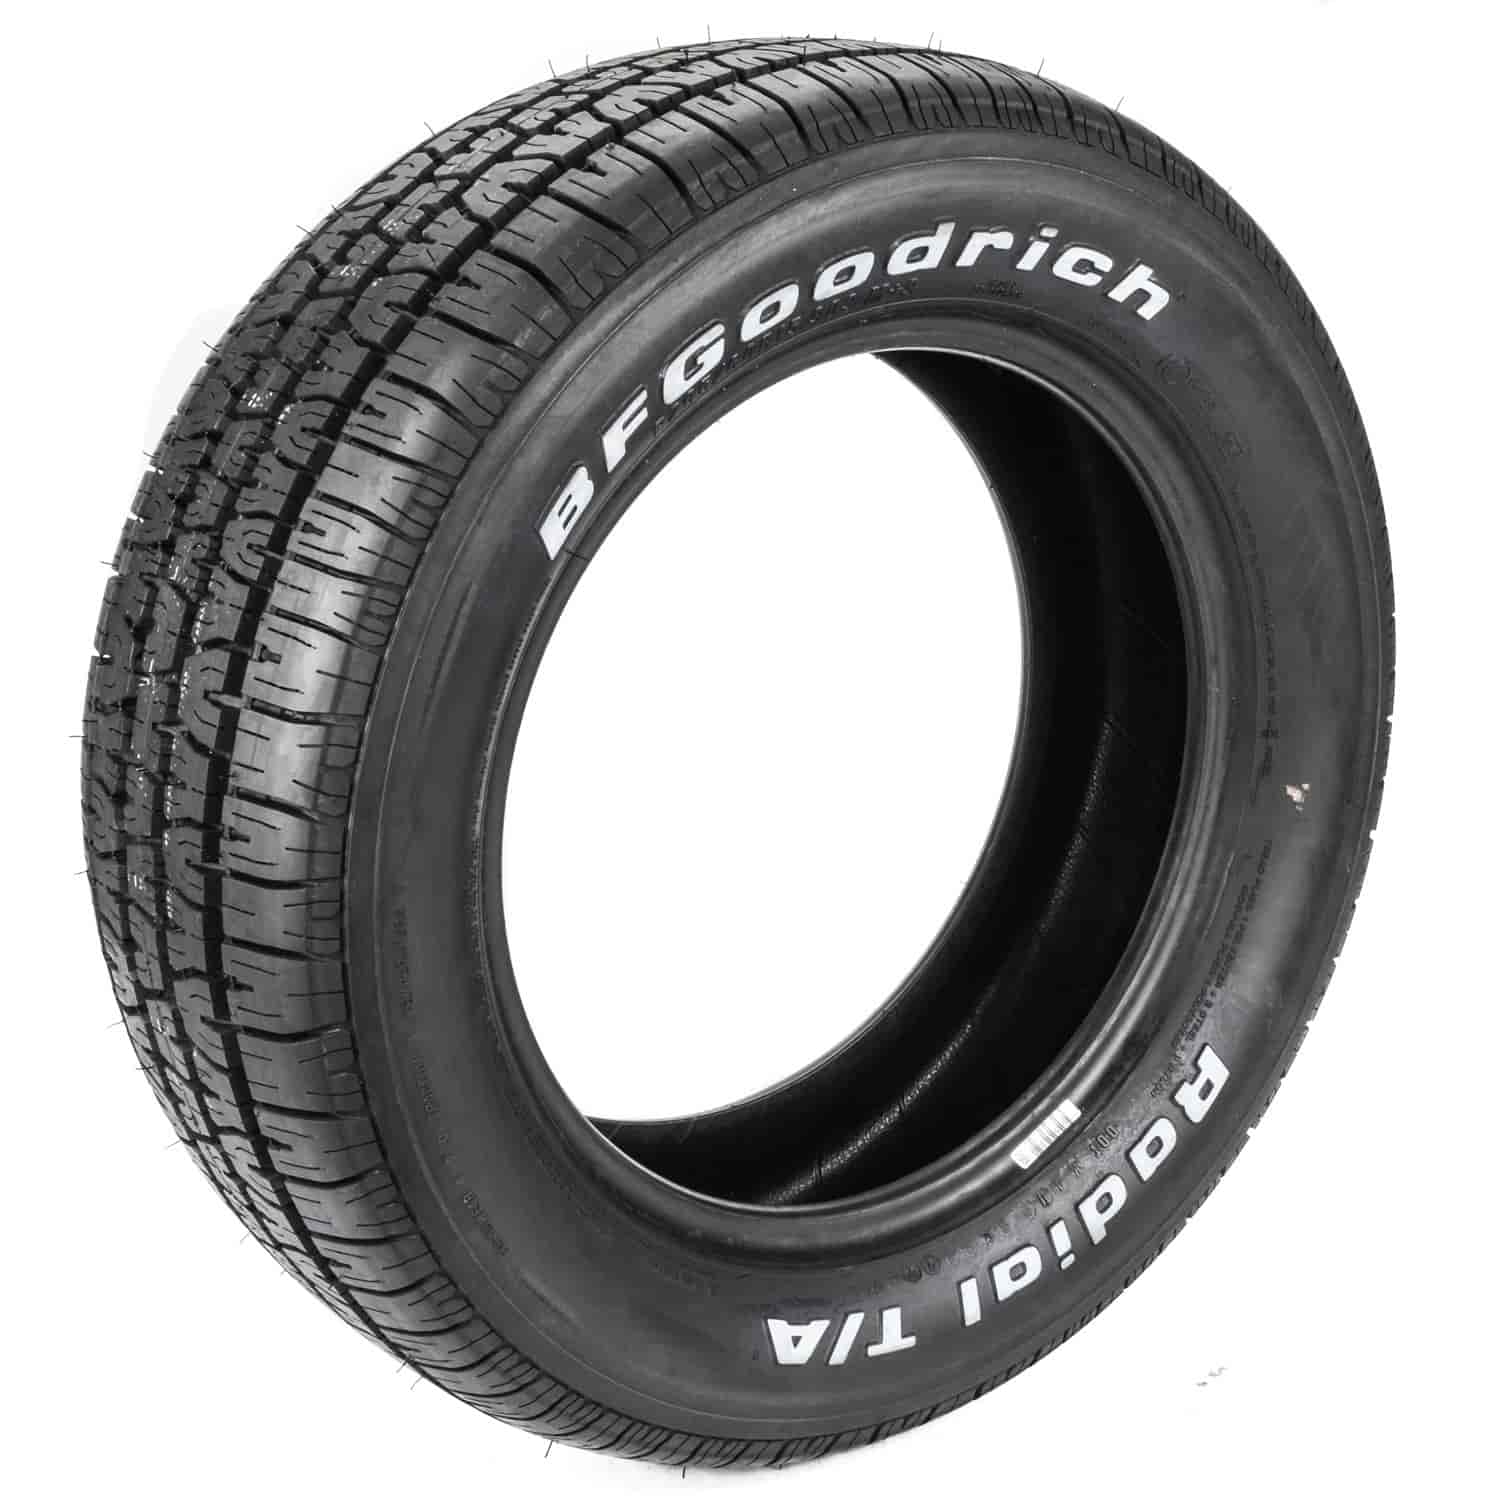 Radial T/A Tire P205/60SR15